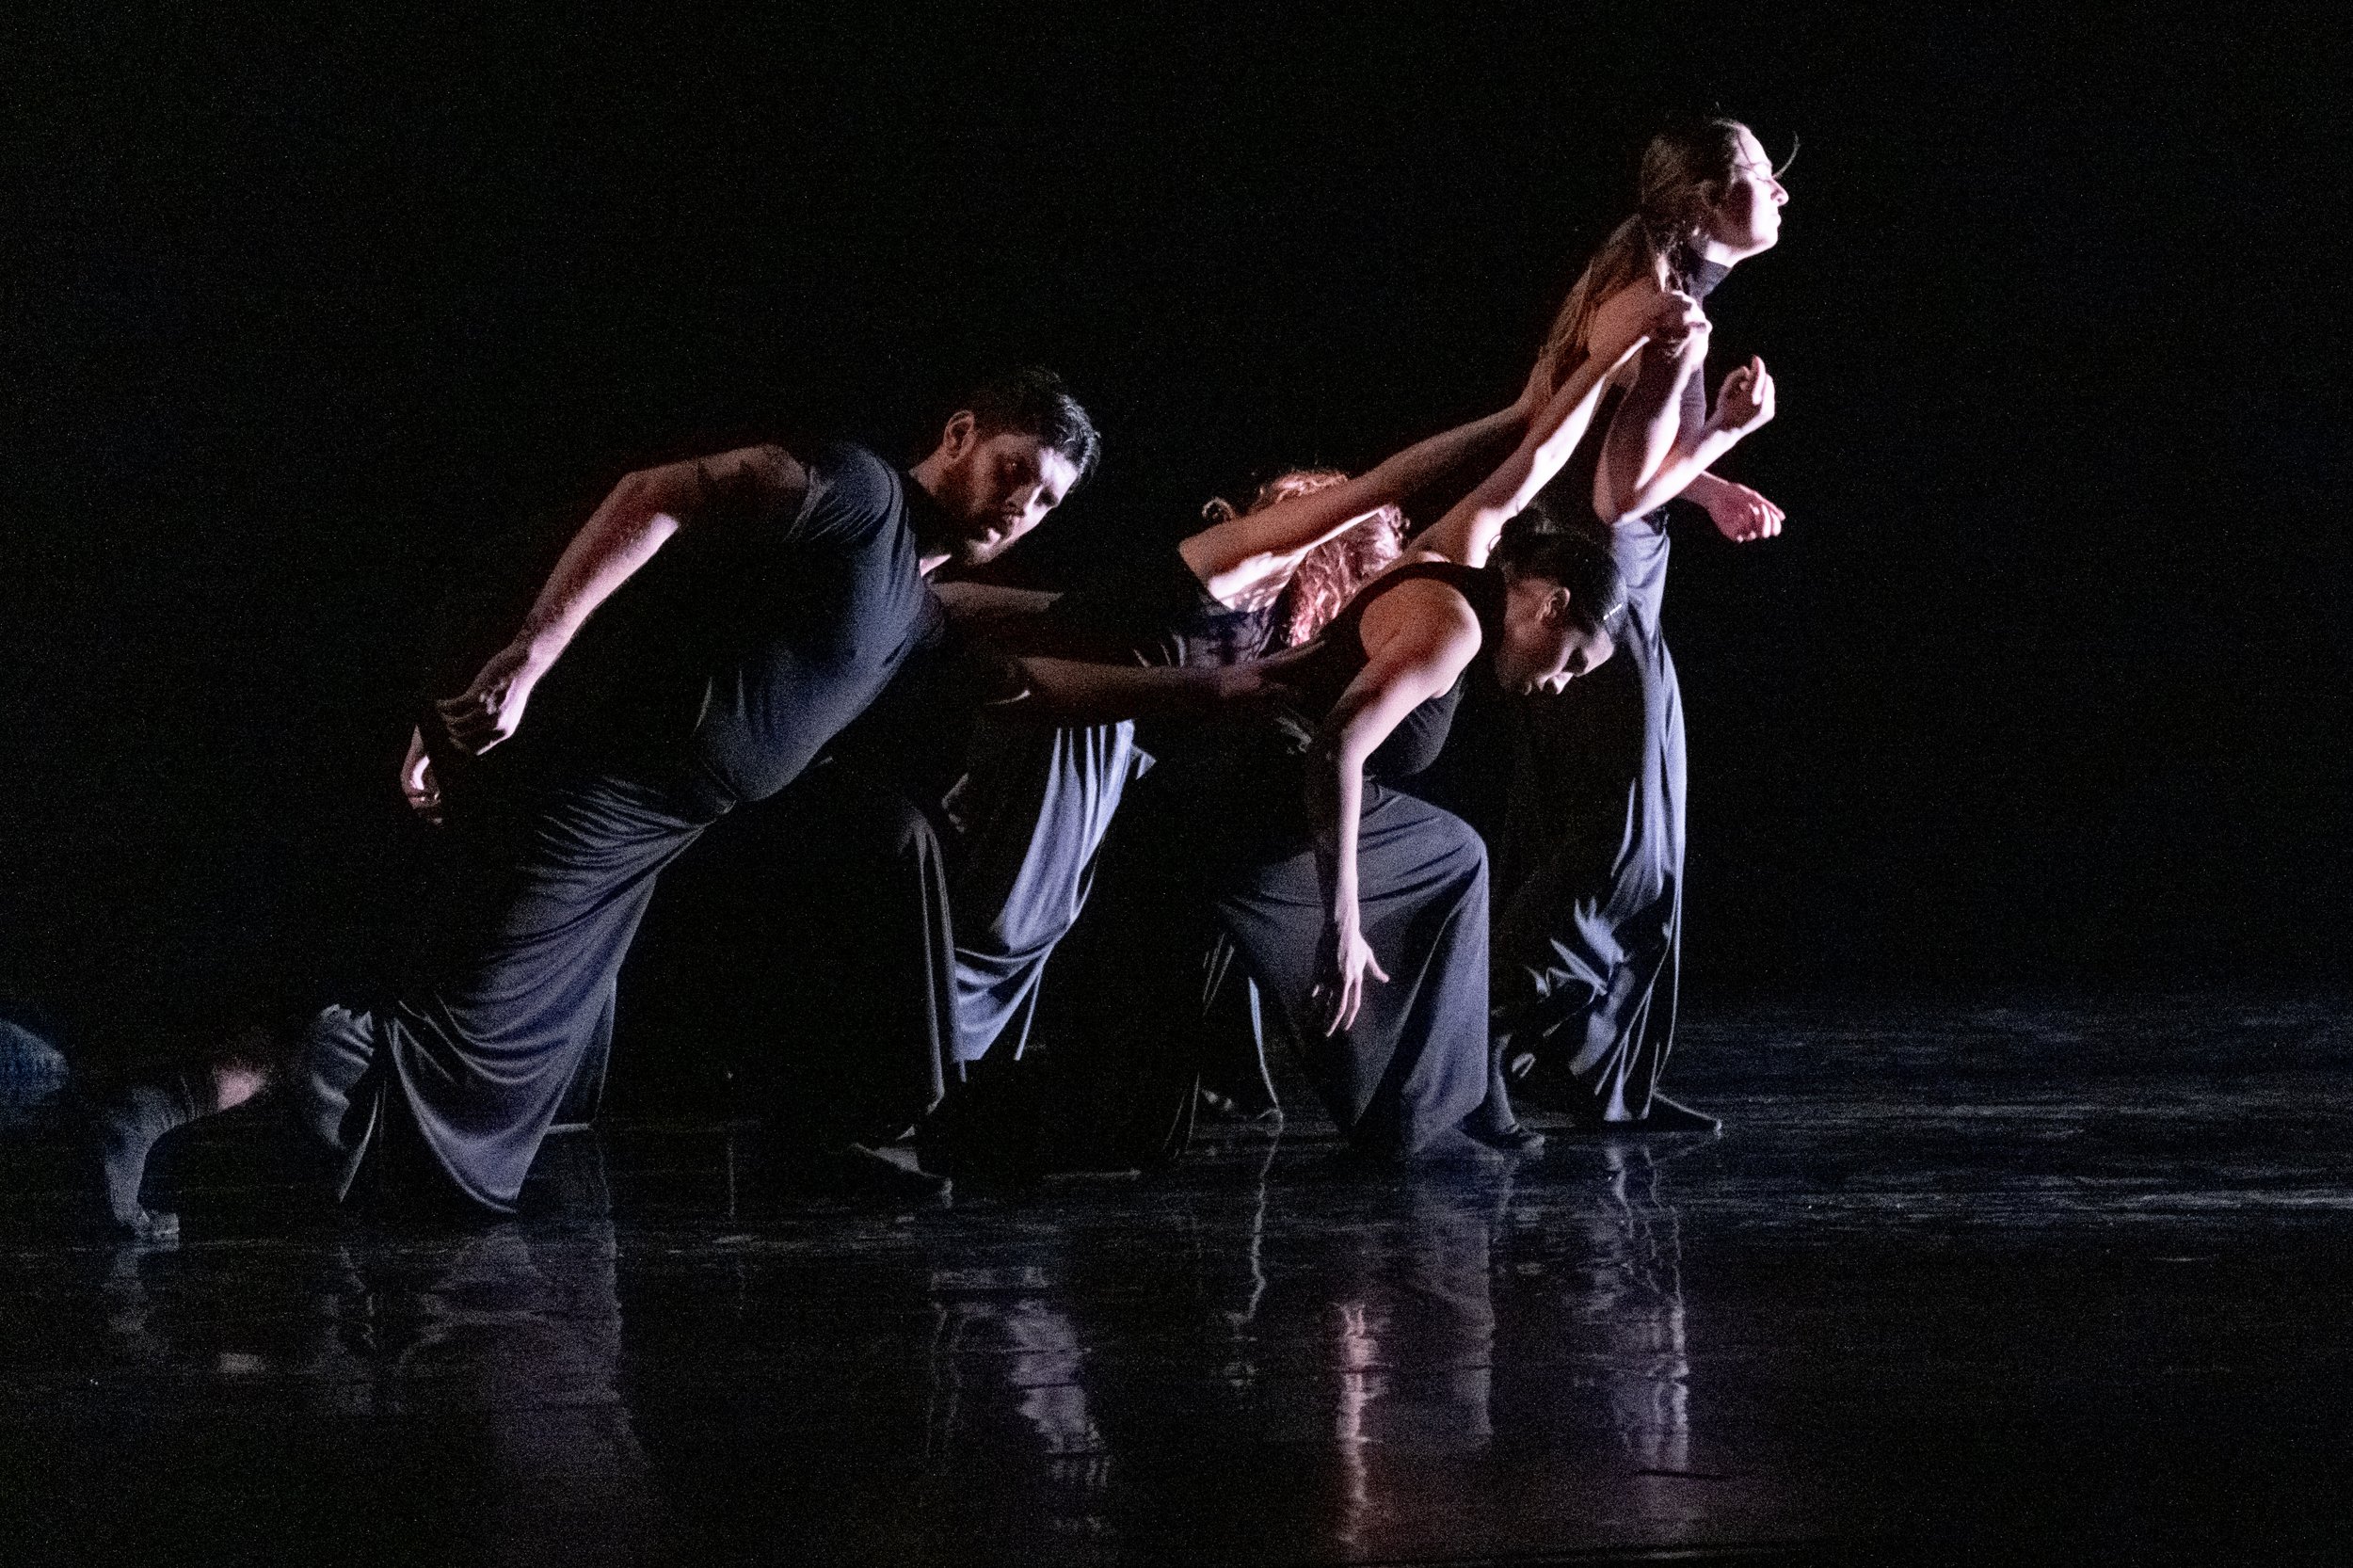 Dramatic Dance Sequences Dazzle at Synapse — The